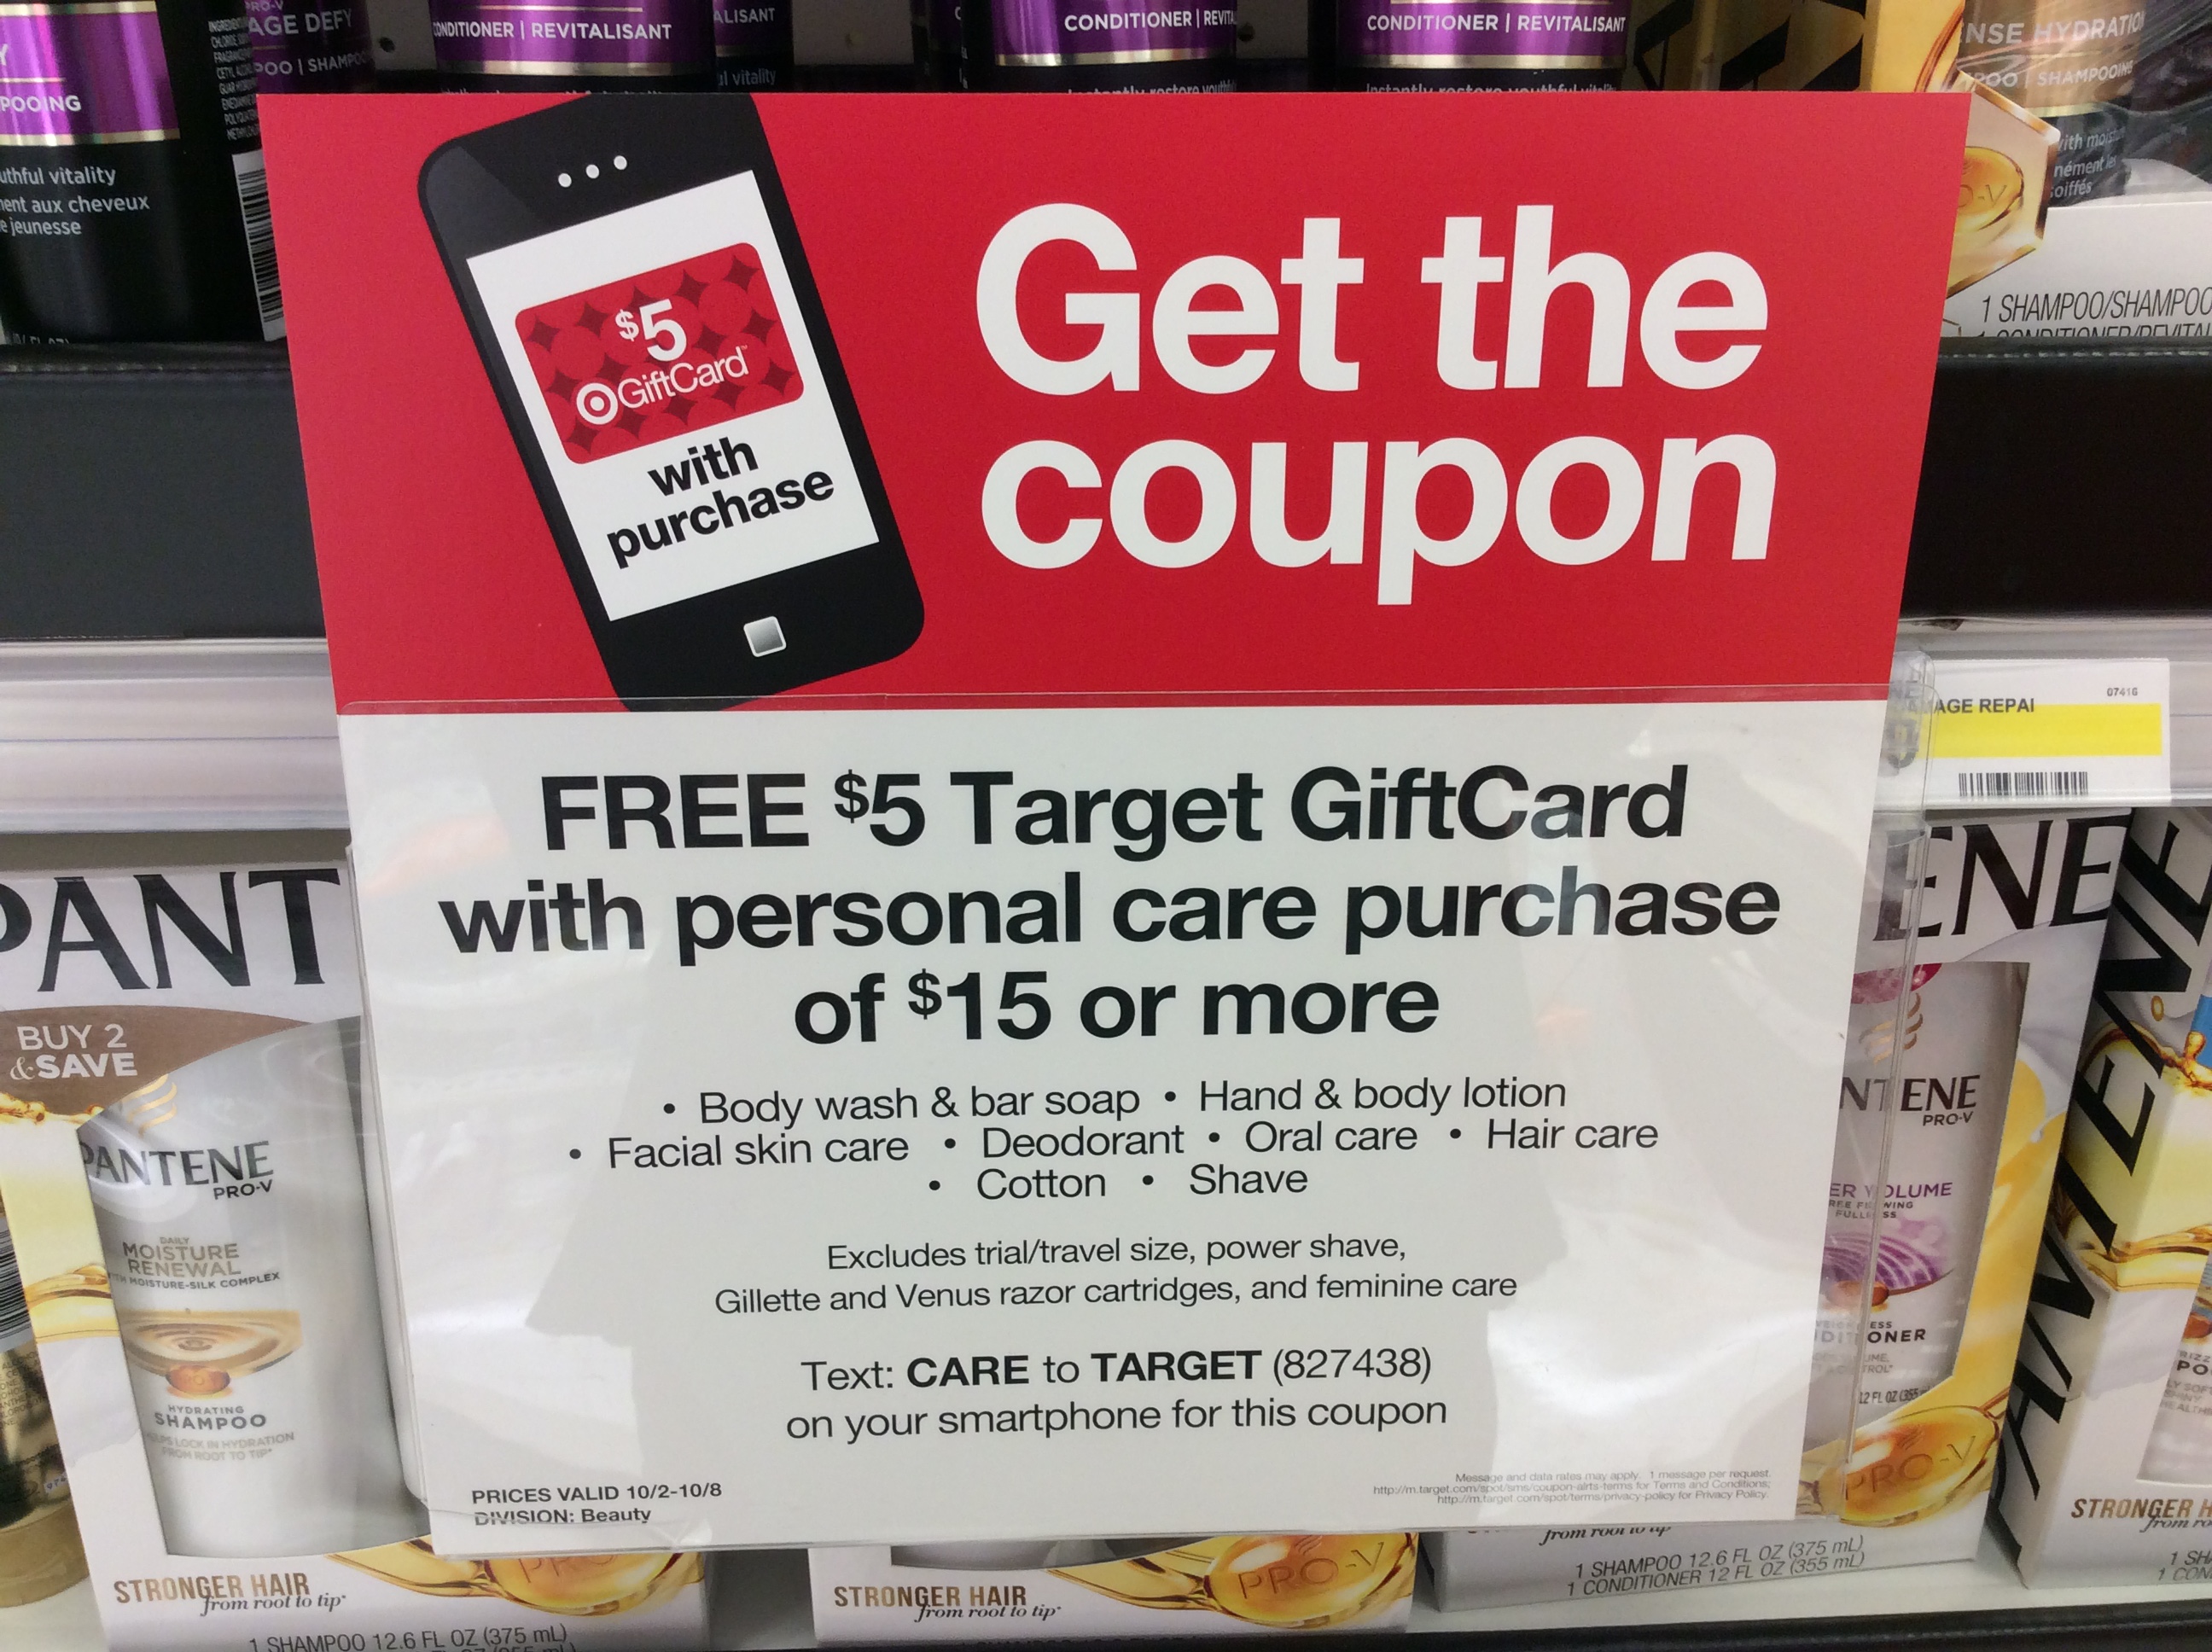 target-free-5-target-gift-card-with-a-personal-care-purchase-of-15